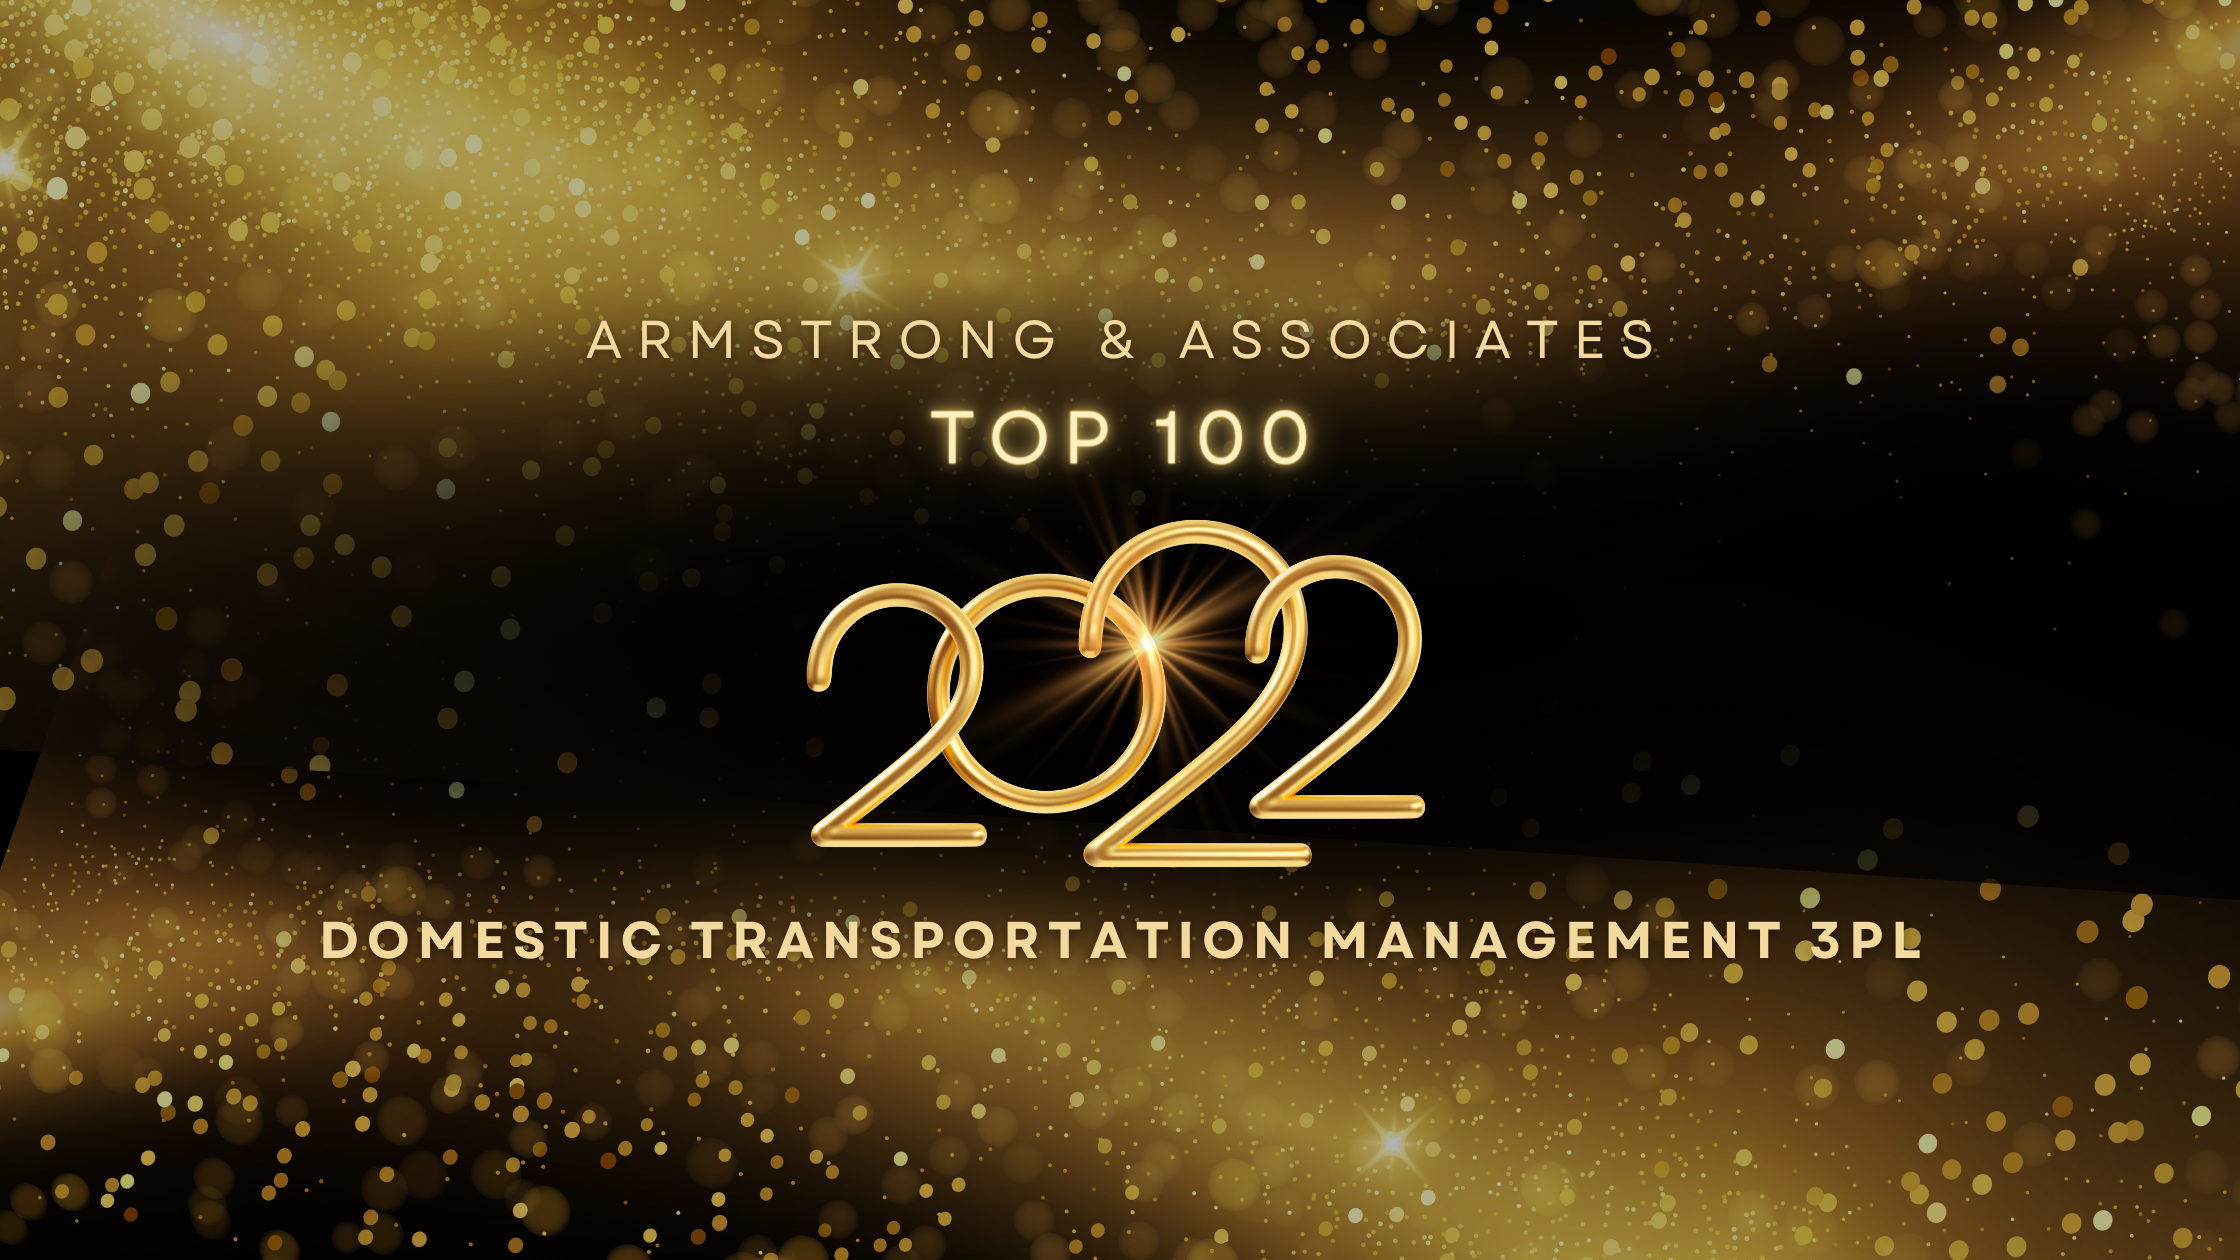 Armstrong Named an Armstrong & Associates' Top 100 Domestic Transportation Manager